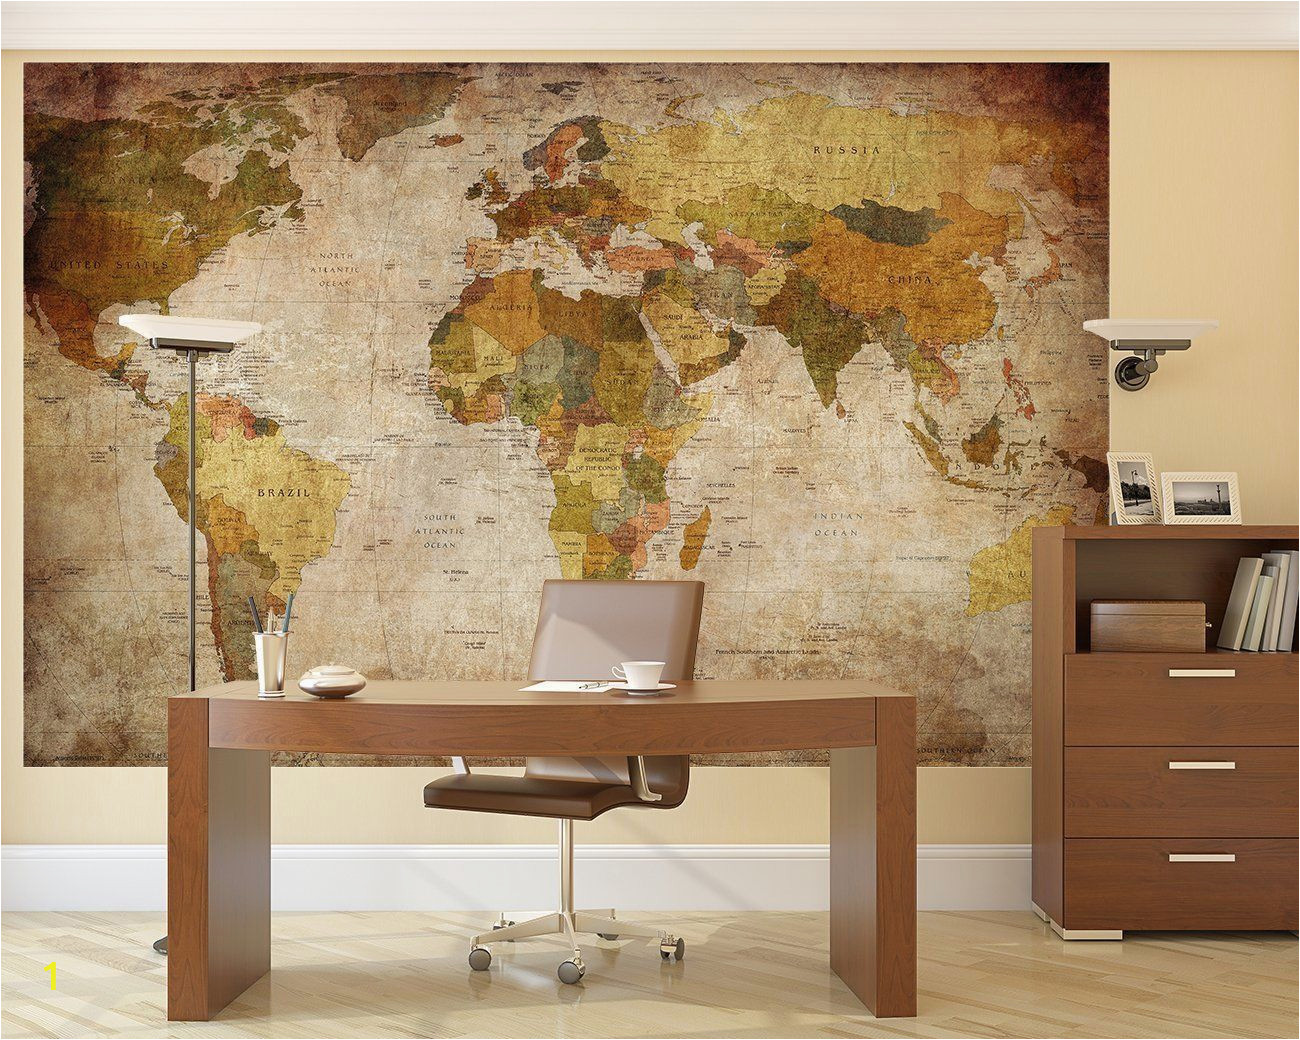 Vintage World Map Wall Mural Details About Vintage World Map Wallpaper Mural Giant